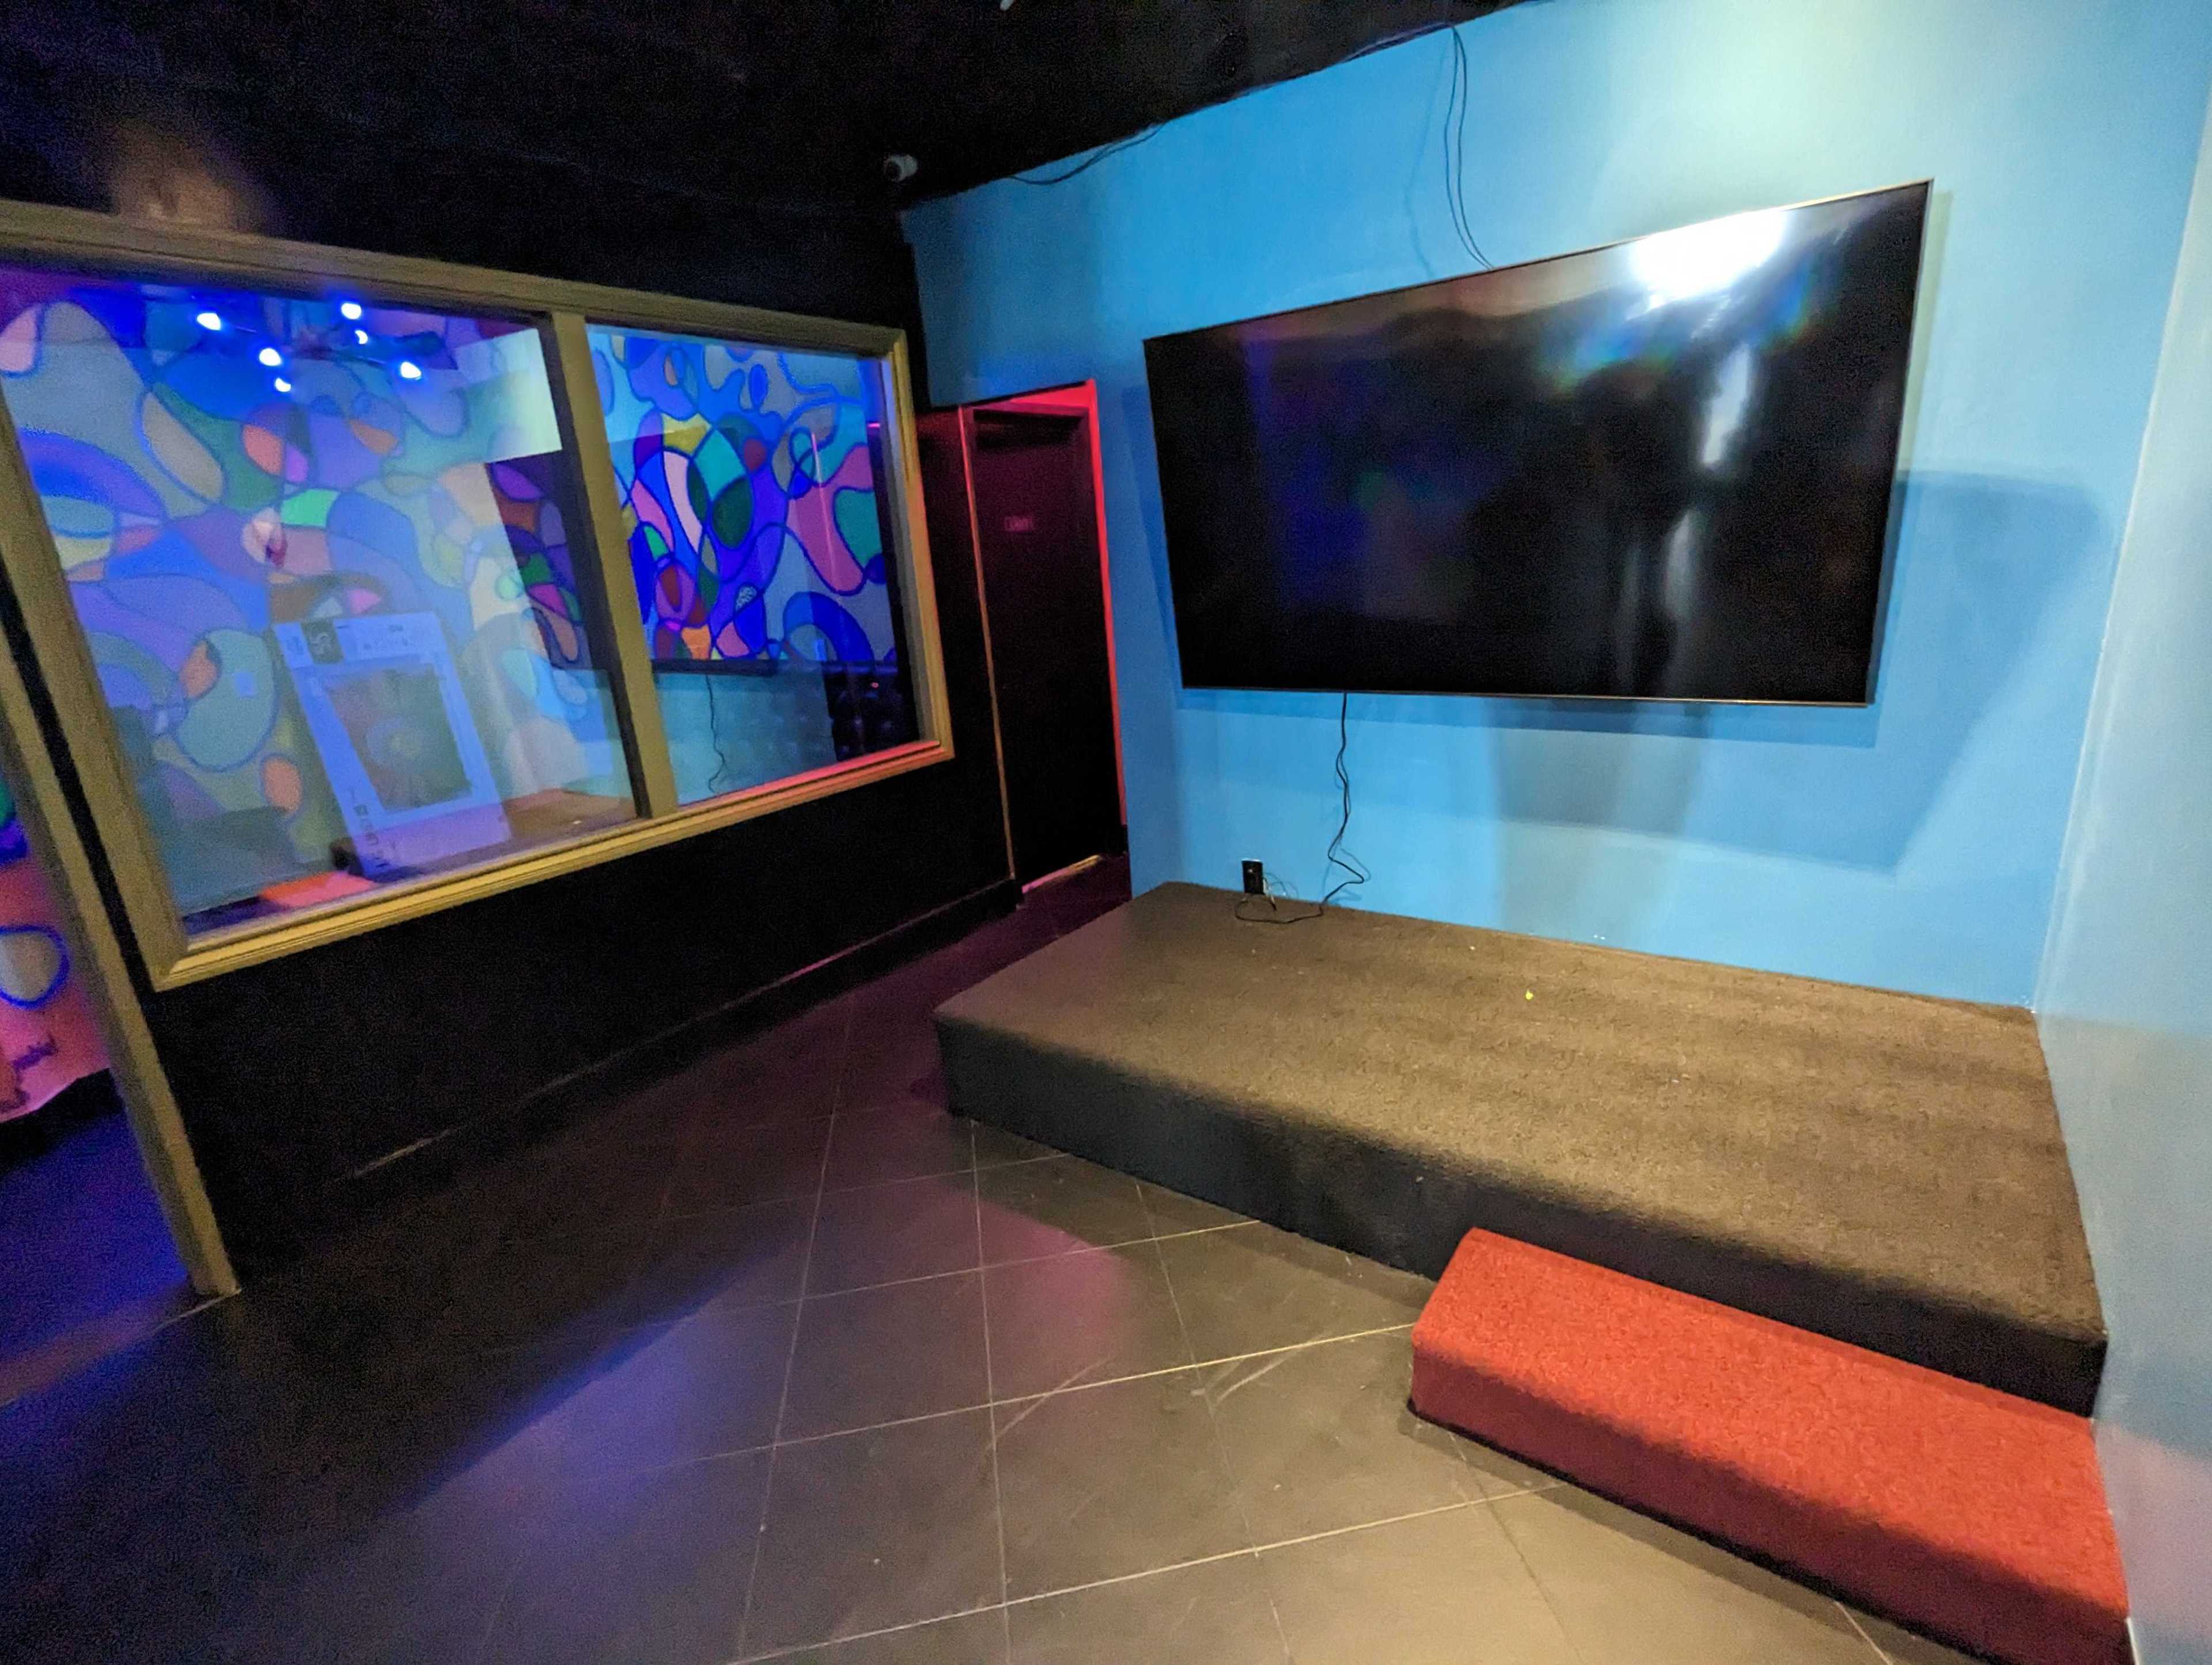 The new bar will have a small stage for karaoke, comedy or performances.